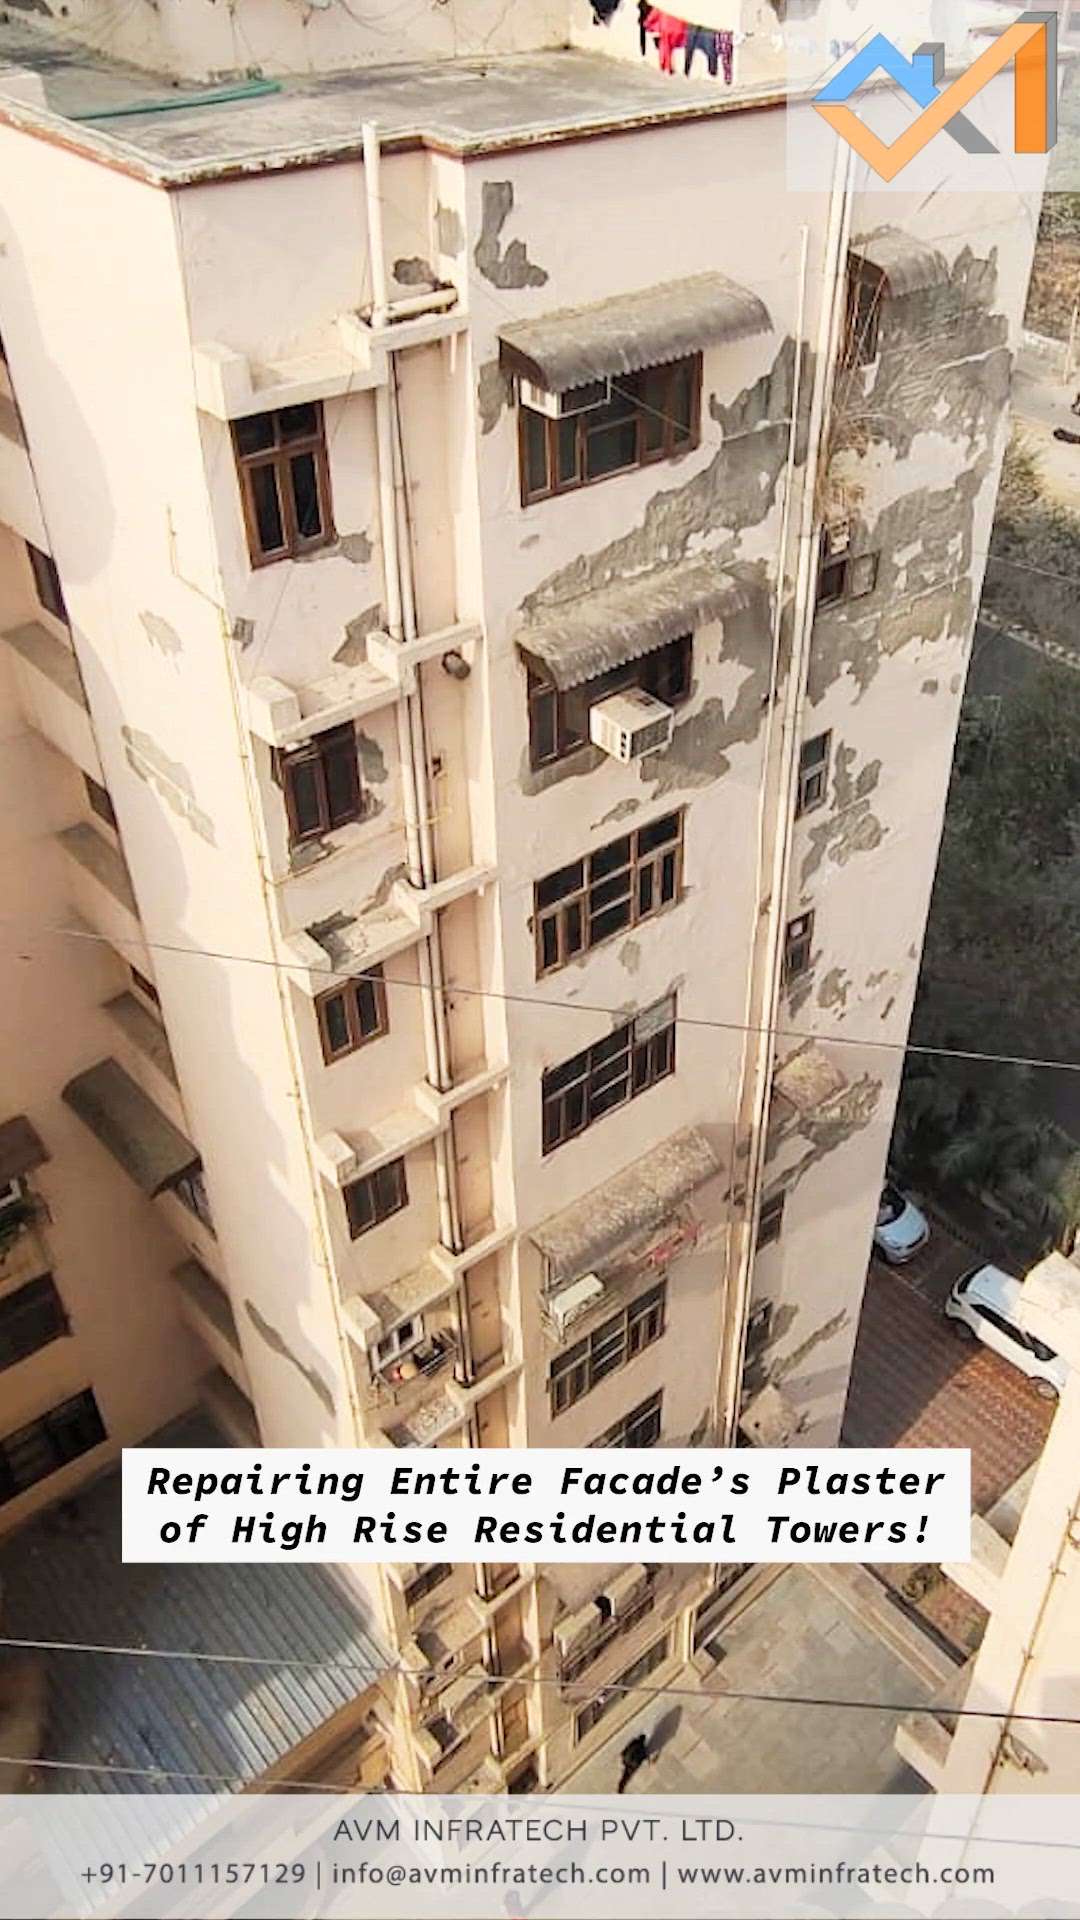 Replastering works in high rise residential towers!


Follow us for more such amazing updates. 
.
.
#high #highrise #highrisebuilding #building #buildings #repair #repairwork #work #works #replastering #plaster #plastering #plasterwork #plasteringlife #repairwork #avminfratech #buildingrepair #residentialtower #residential